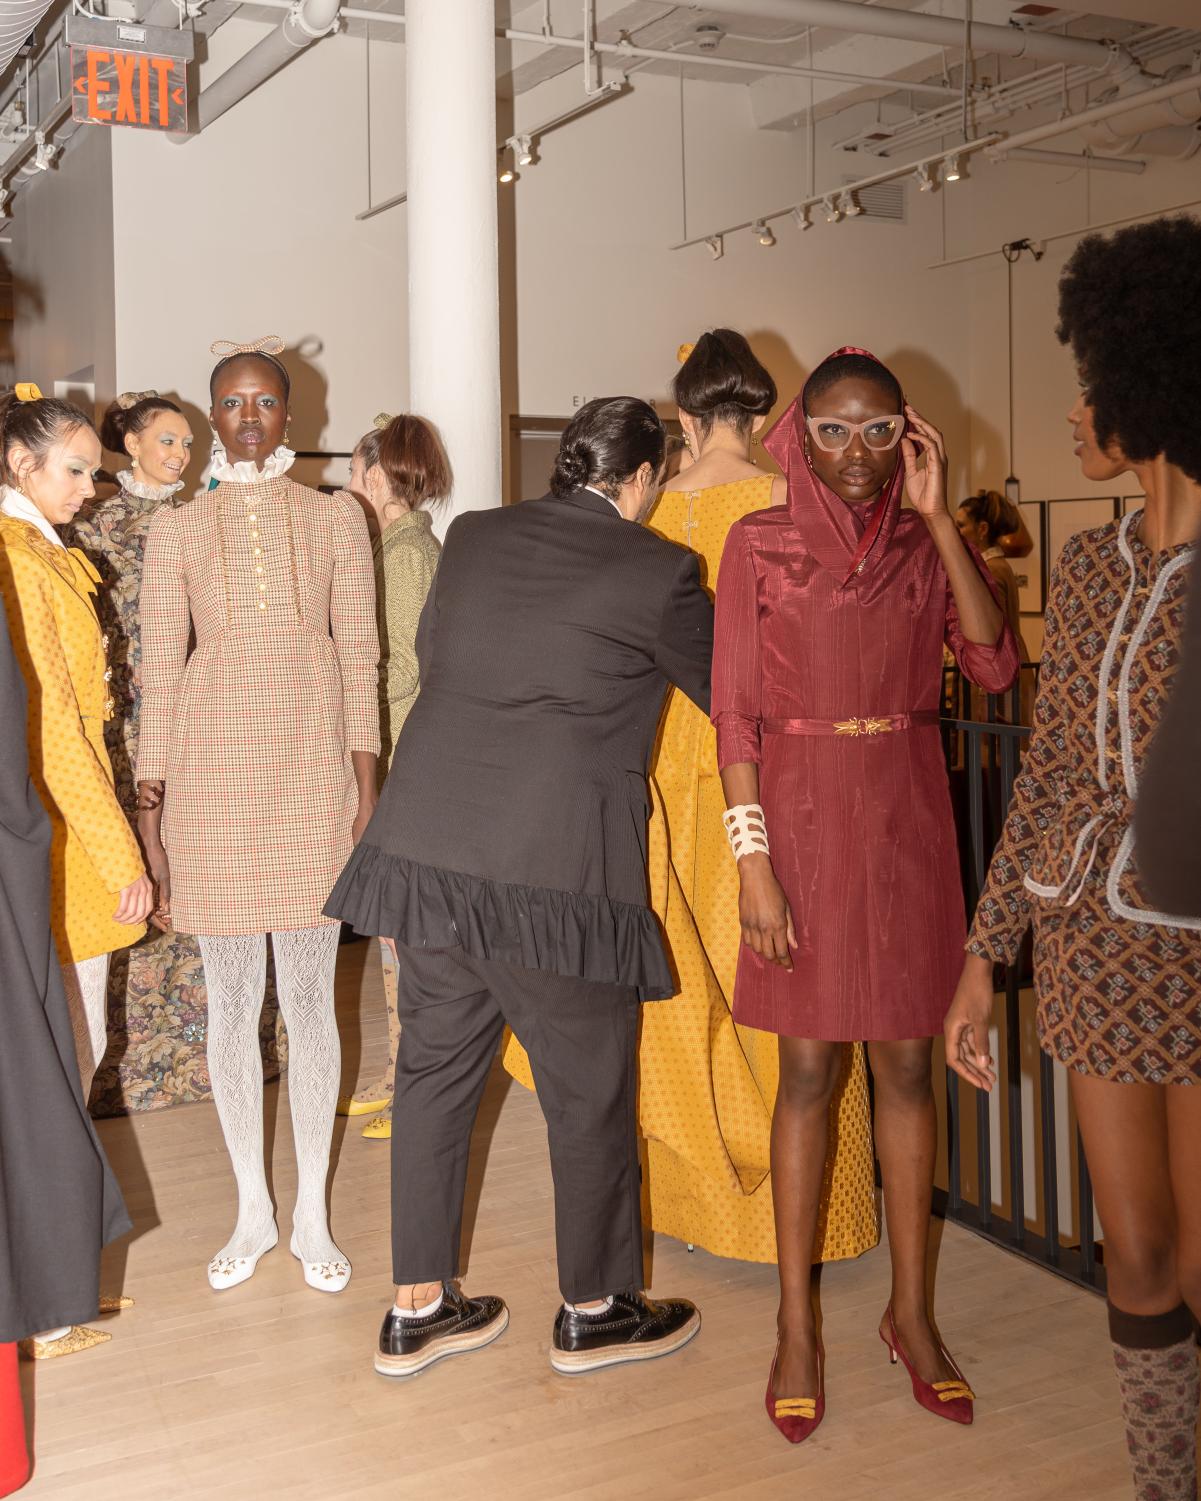 Flash photograph of many female presenting models lining up before walking the runway. Victor, the designer, is pictured in the middle with his back to the camera as he organizes the models.